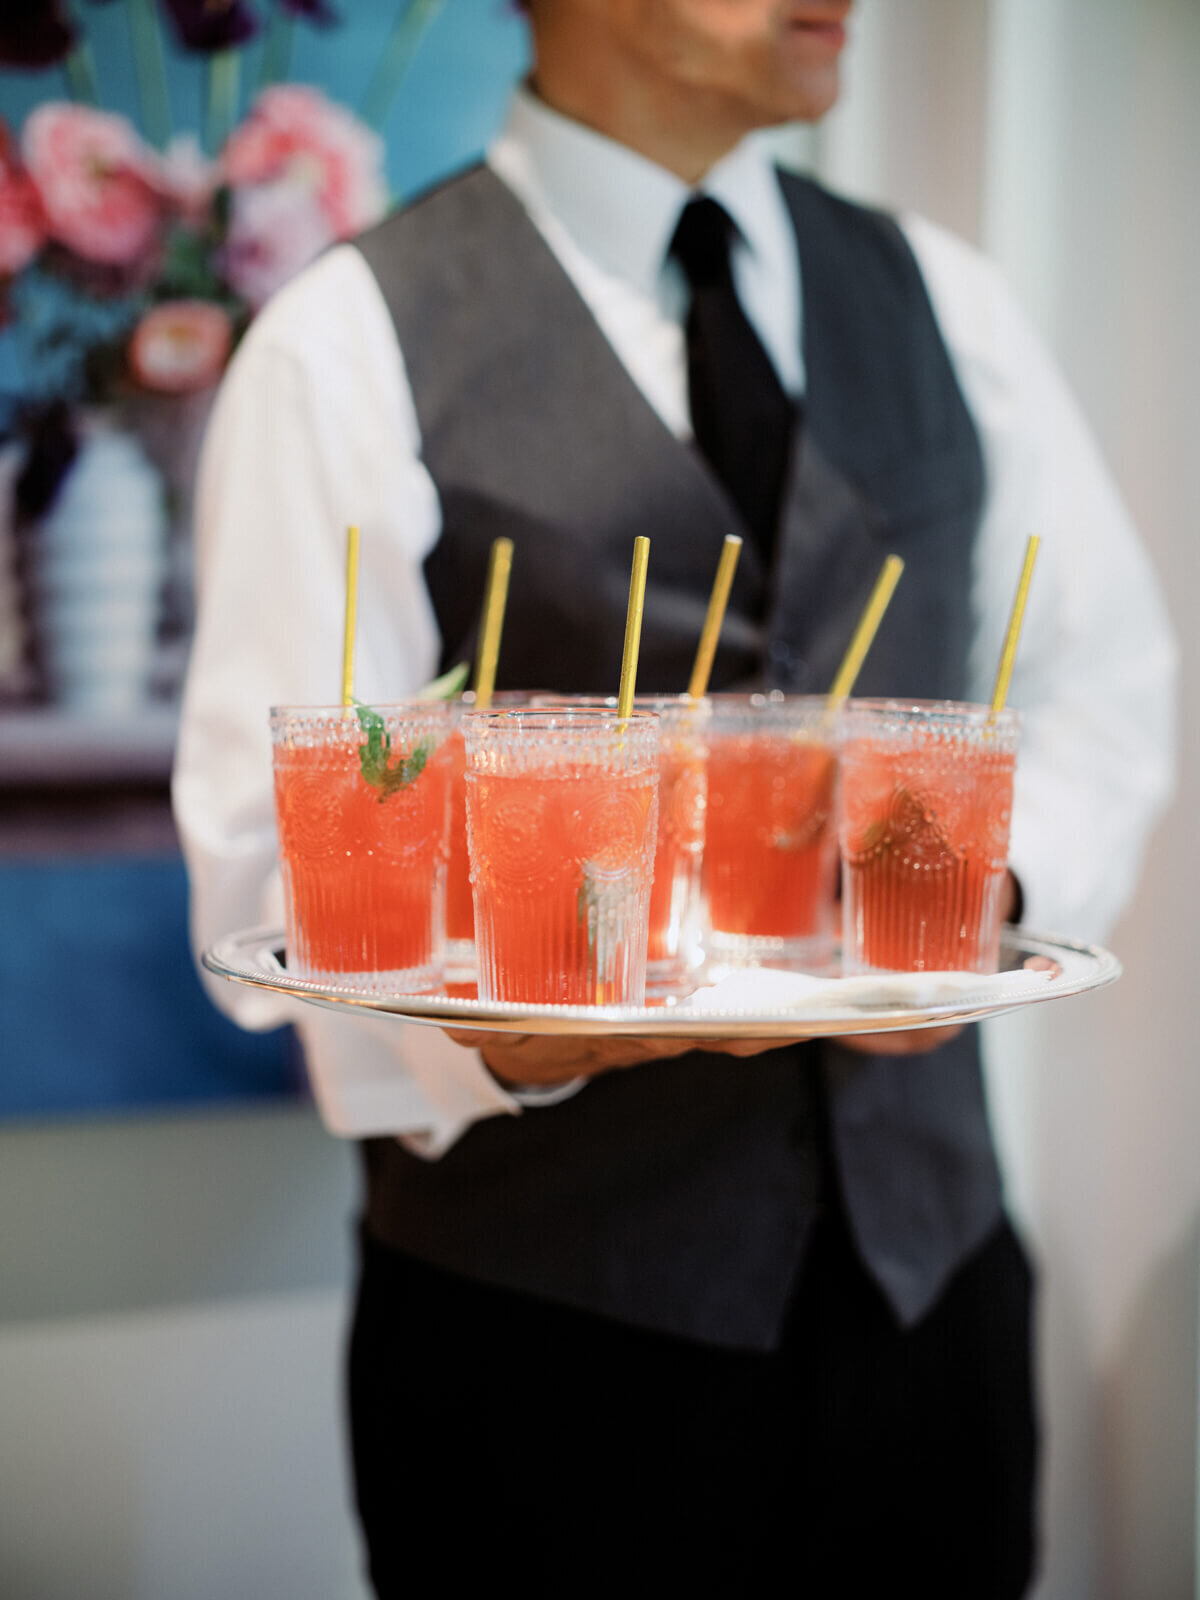 The waiter is holding a round tray of six red drinks with straws.